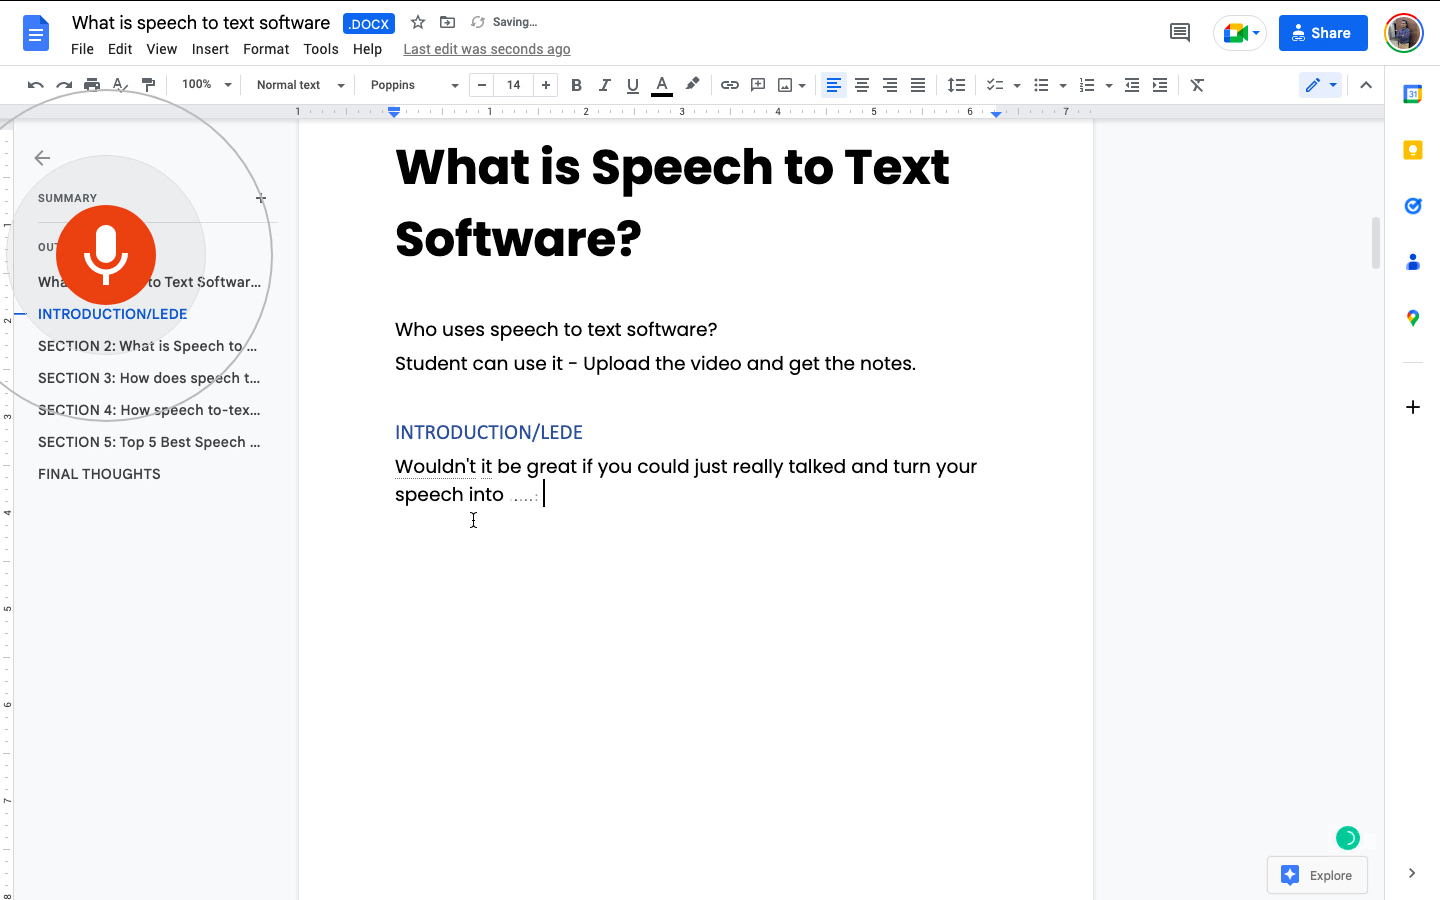 Speech to text dictation